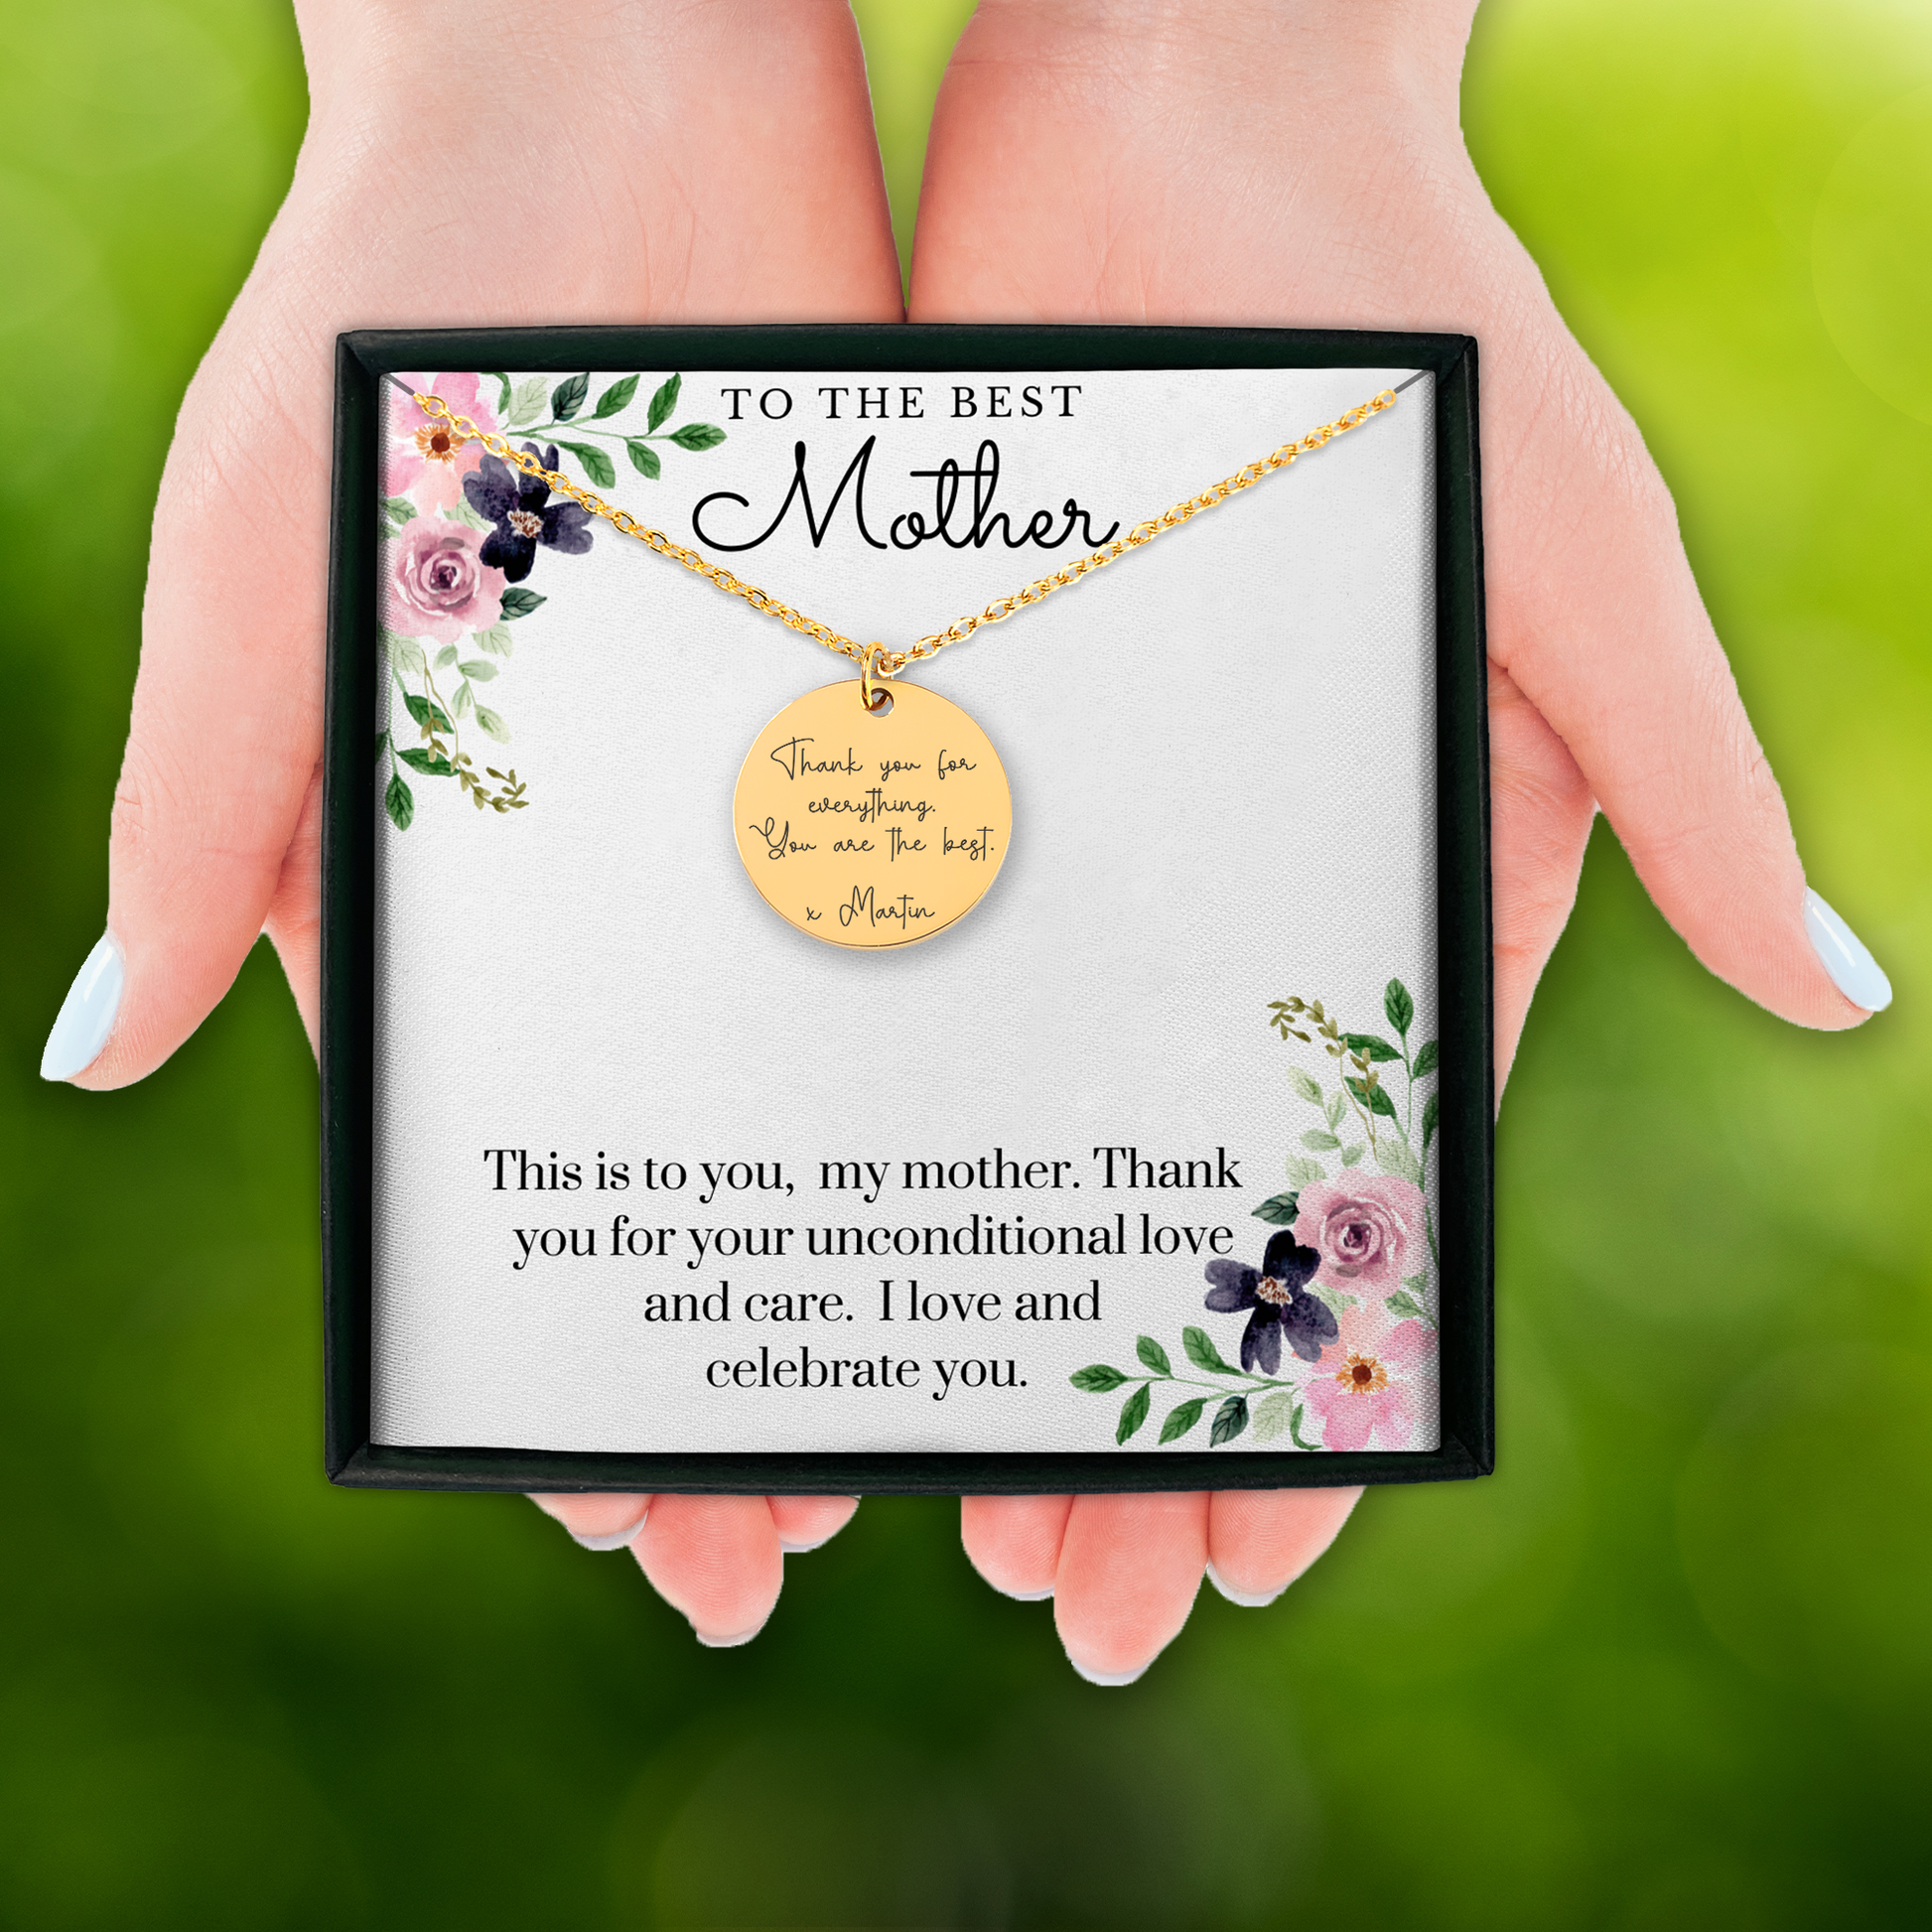 Best Mother - Unconditional Love - GetGifts